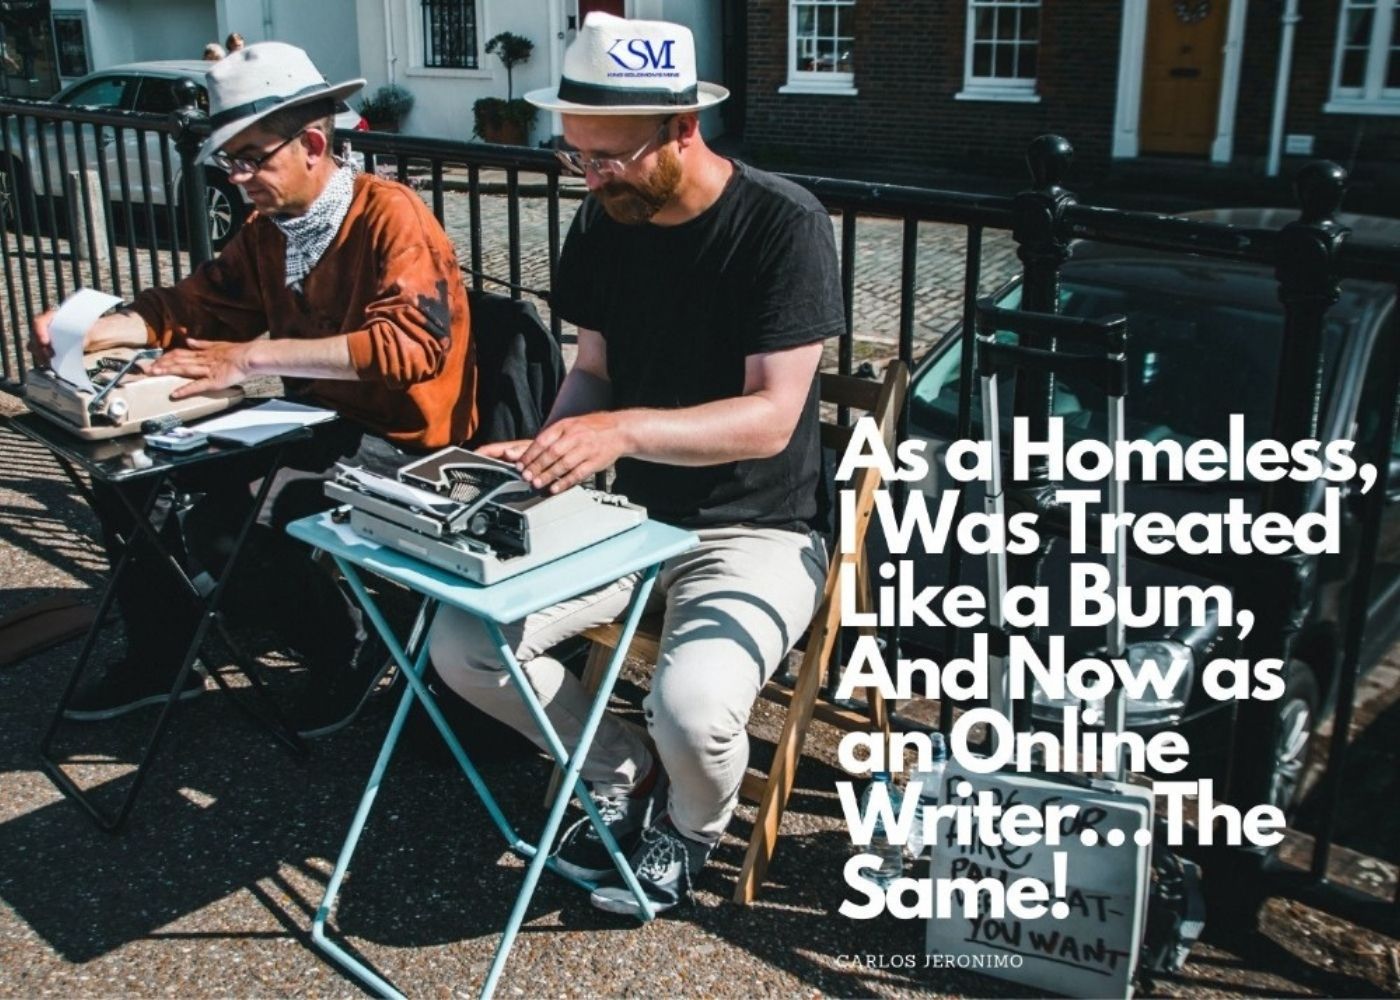 As a Homeless, I Was Treated Like a Bum, And Now as an Online Writerâ€¦The Same!